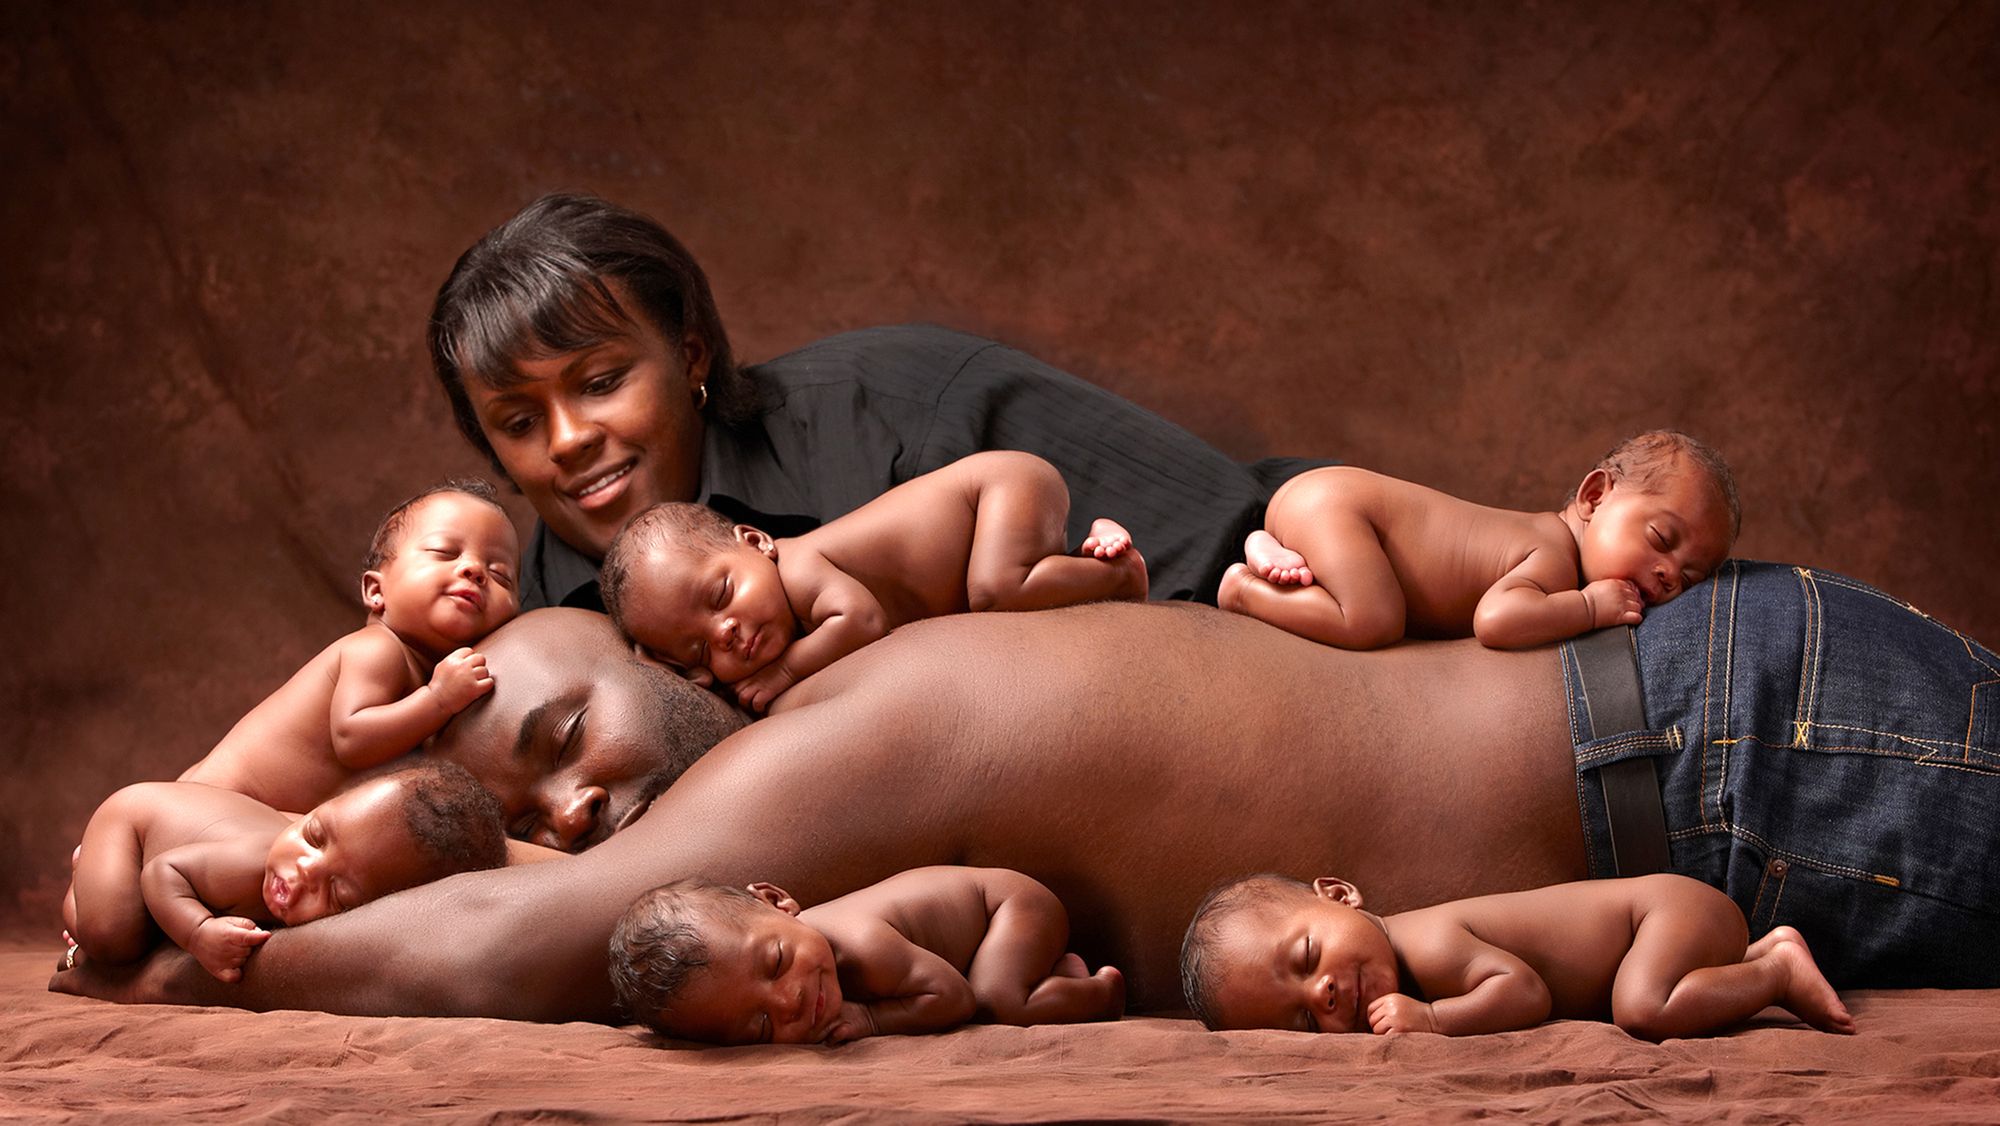 Life’s flowers: how sextuplets look like being already 11 years old